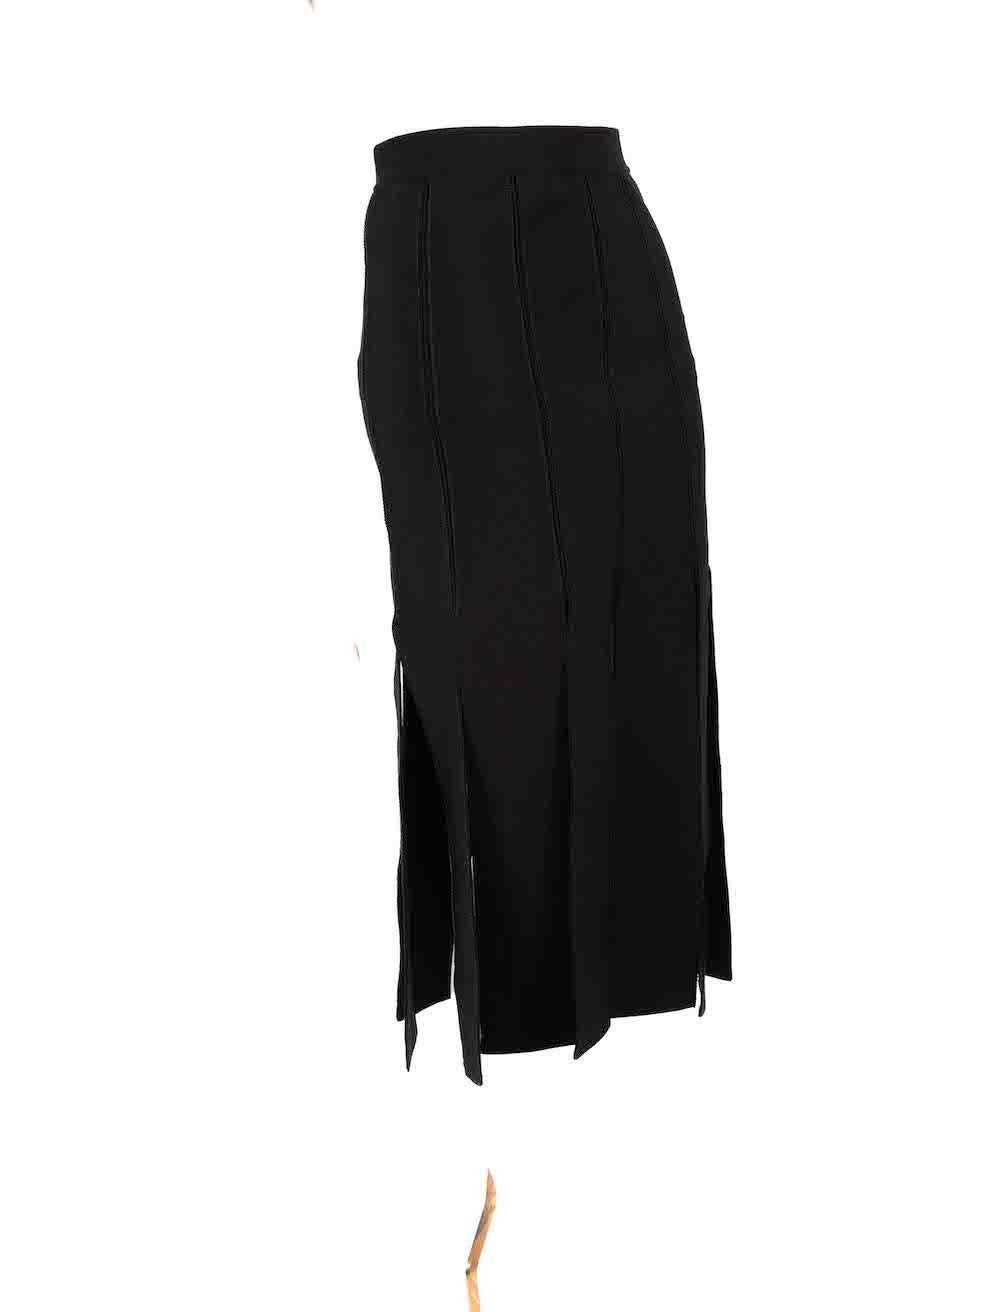 Sandro Black Elasticated Fringe Hem Midi Skirt Size S In Excellent Condition For Sale In London, GB